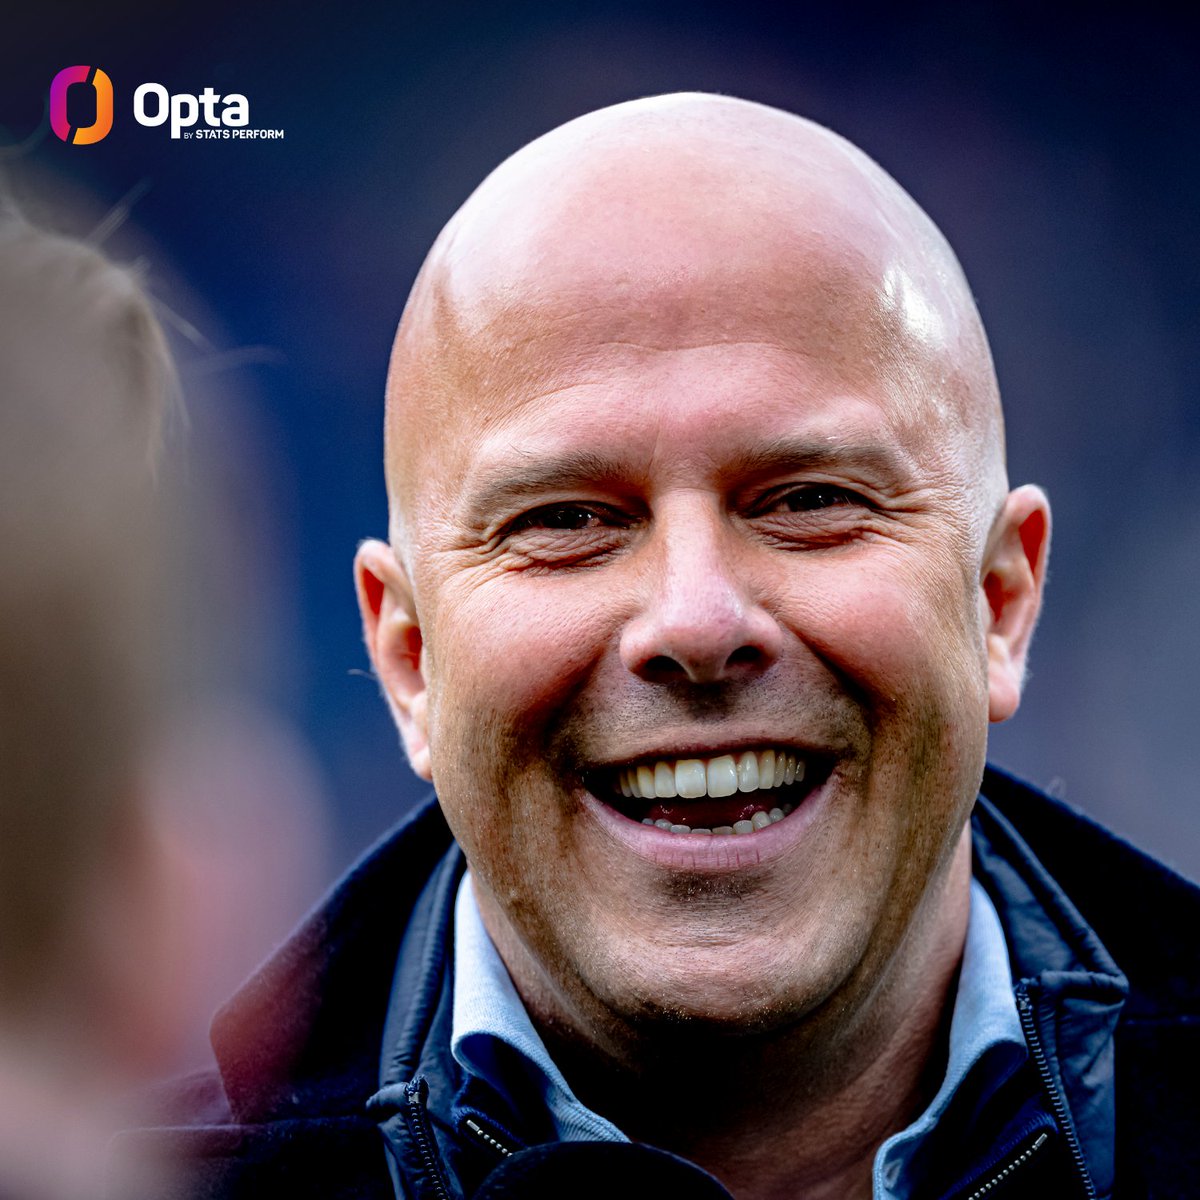 2.3 - @Feyenoord in the @eredivisie since Arne Slot's appointment in 2021-22: 2.3 points per game 🥈 1166 High Turnovers 🥇 203 Shot-ending High Turnovers 🥇 29 Goal-ending High Turnovers 🥇 727 Ball recoveries in the final third 🥇 Gegenpressing.